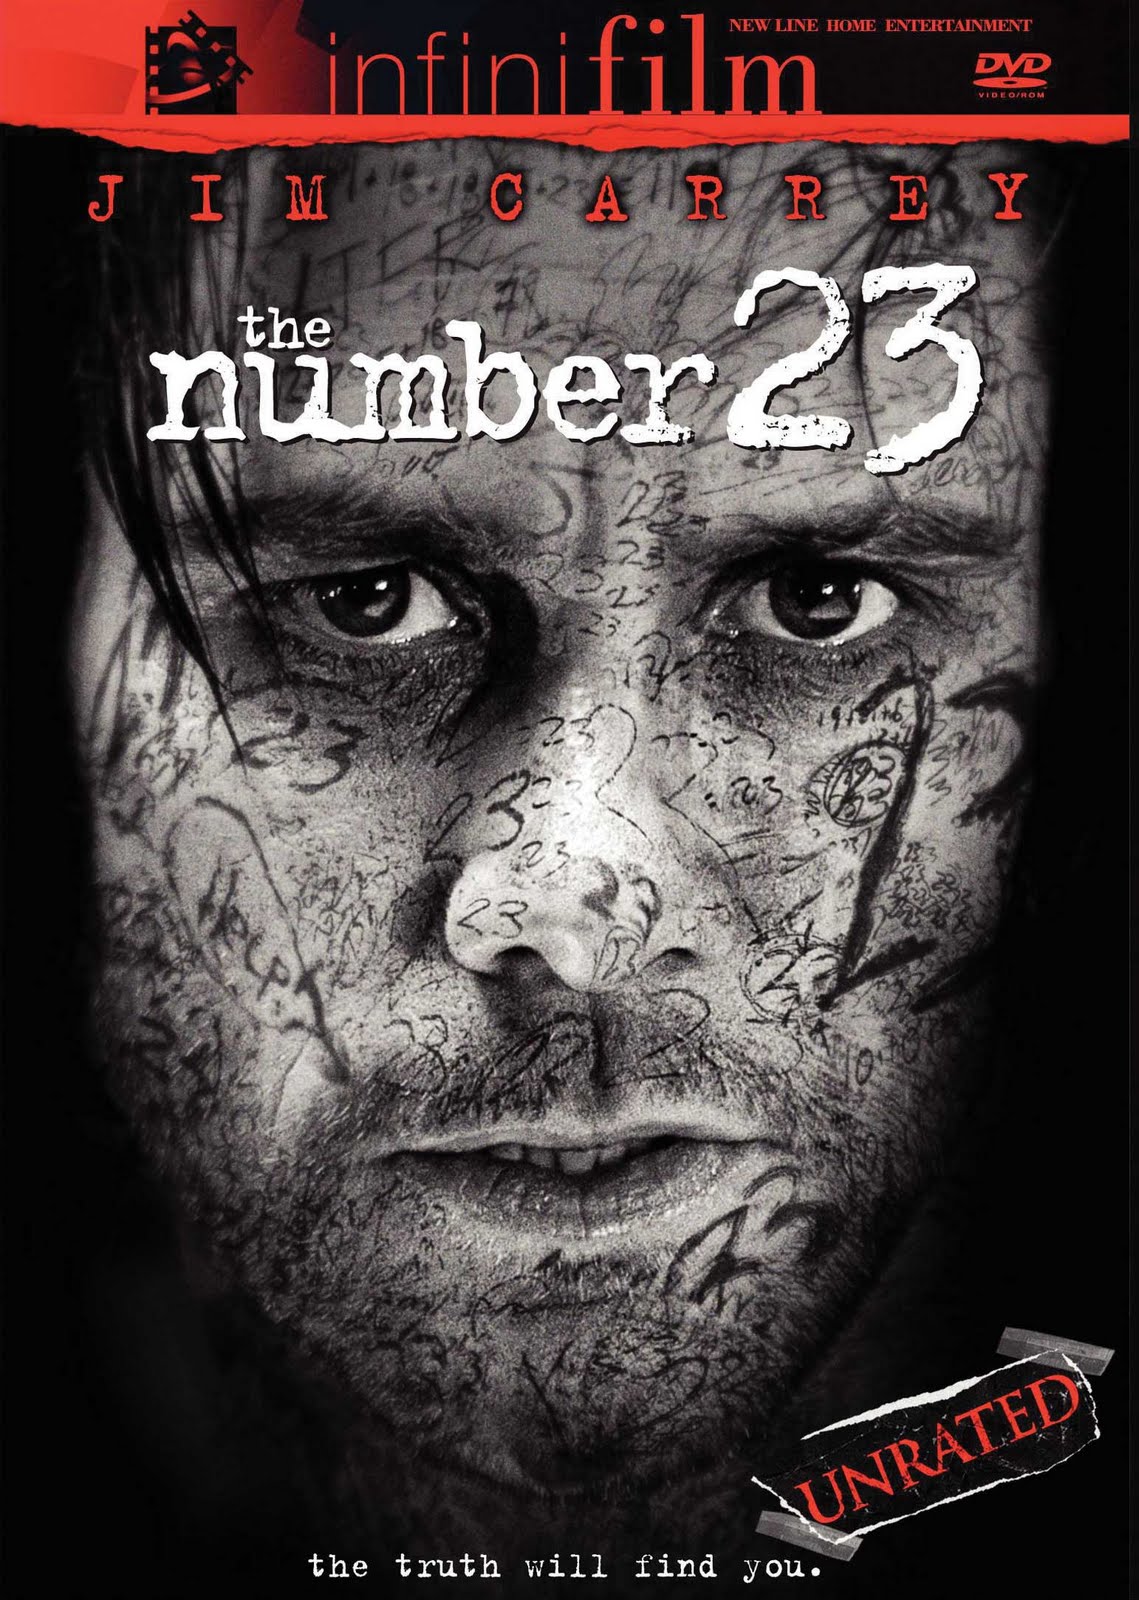 ISFA Book and Film Reviews The Number 23